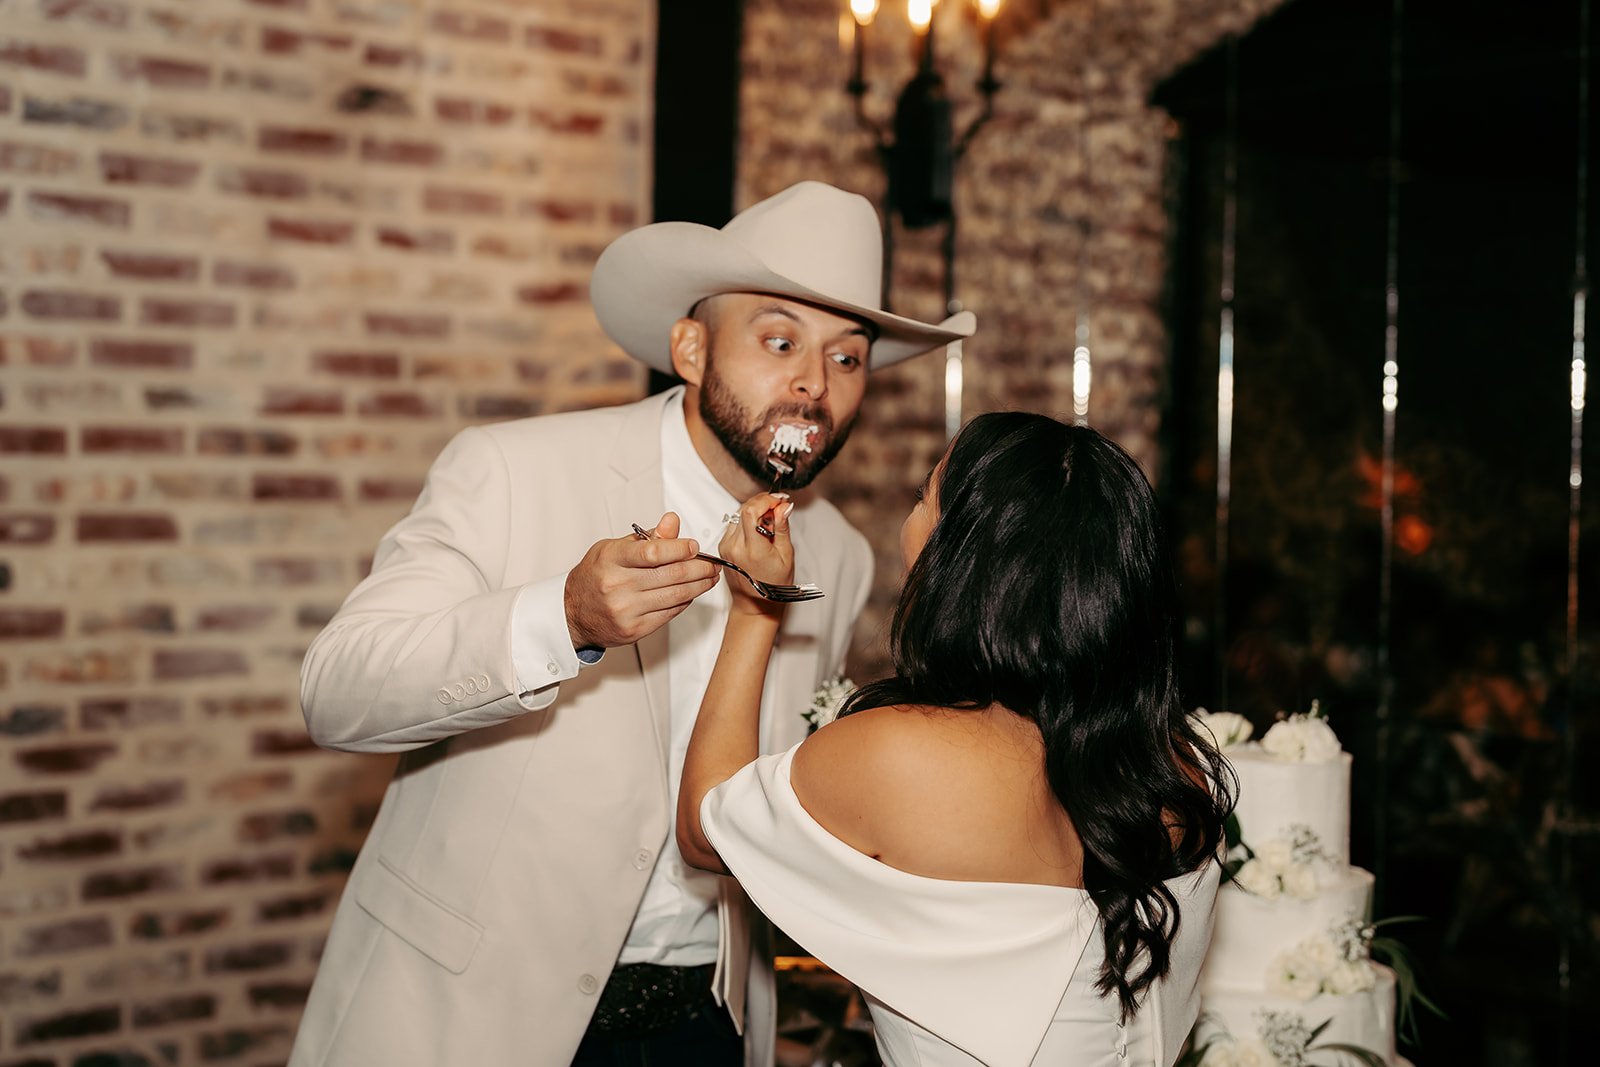 Jessica &amp; Beto’s Mexican Western Wedding at Park 31